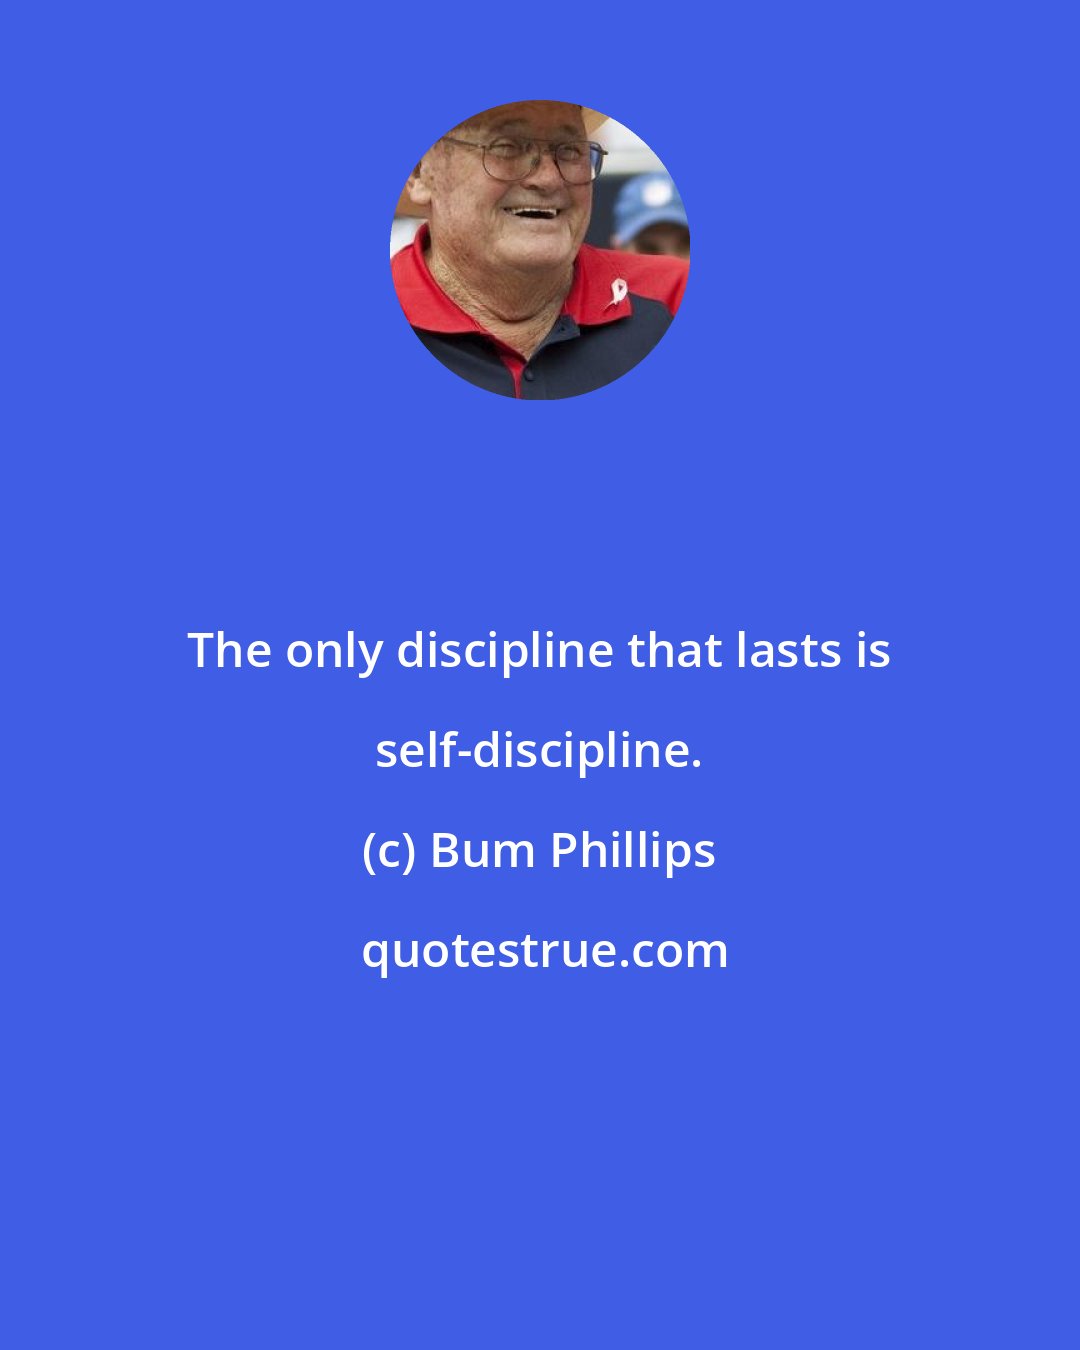 Bum Phillips: The only discipline that lasts is self-discipline.